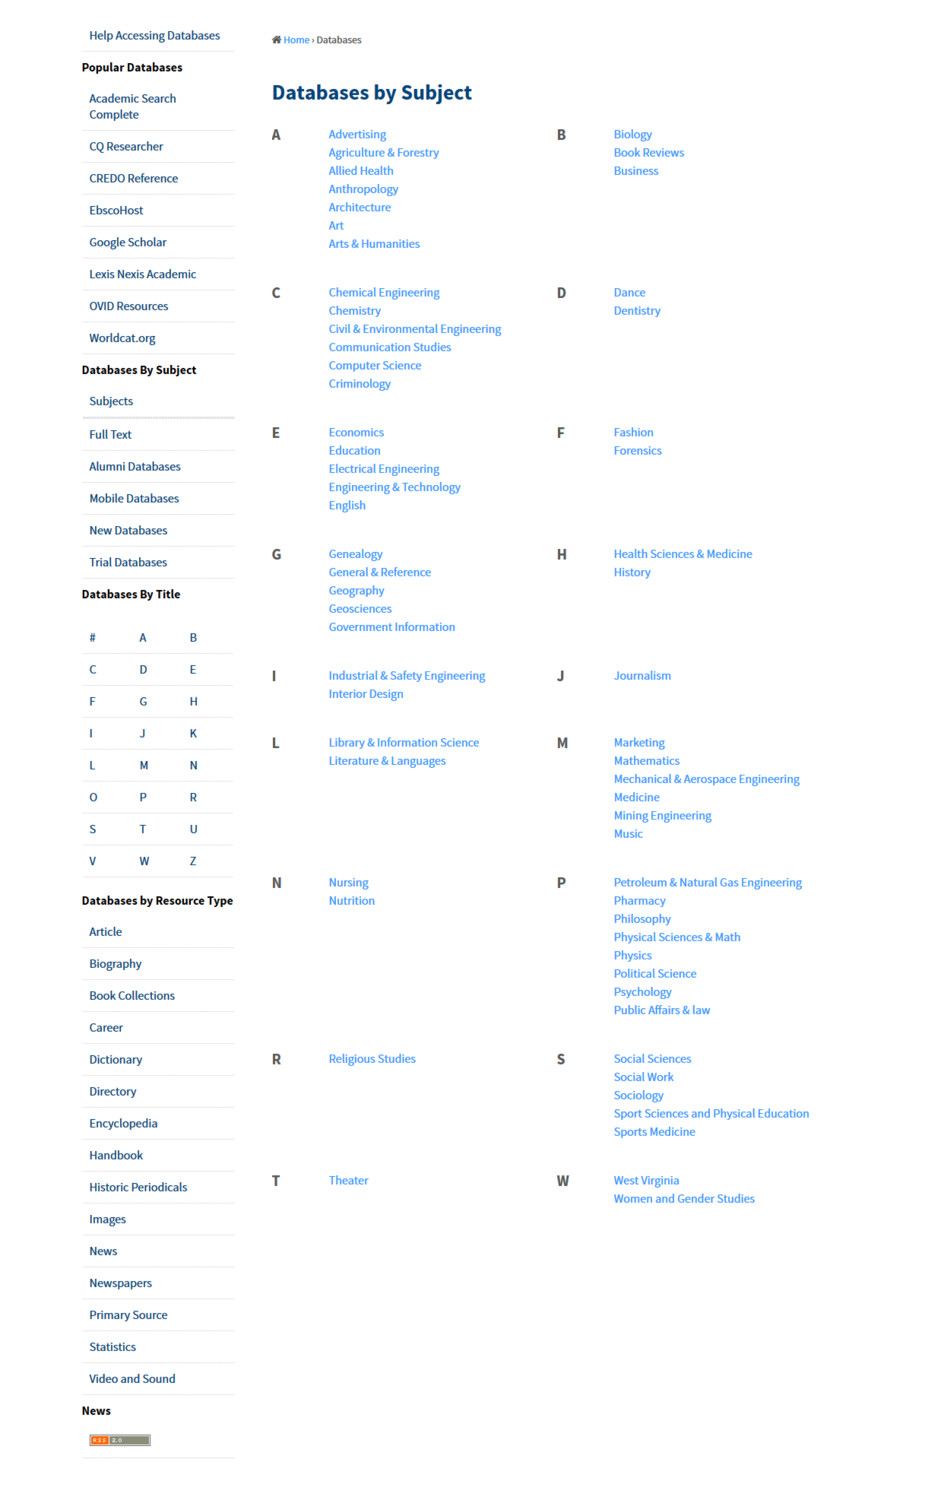 A screenshot of the WVU Libraries databases web application as it existed before 2015. This design wasn’t responsive, utilized a left-hand faceting system, and navigation/search elements were inherited into the web application.